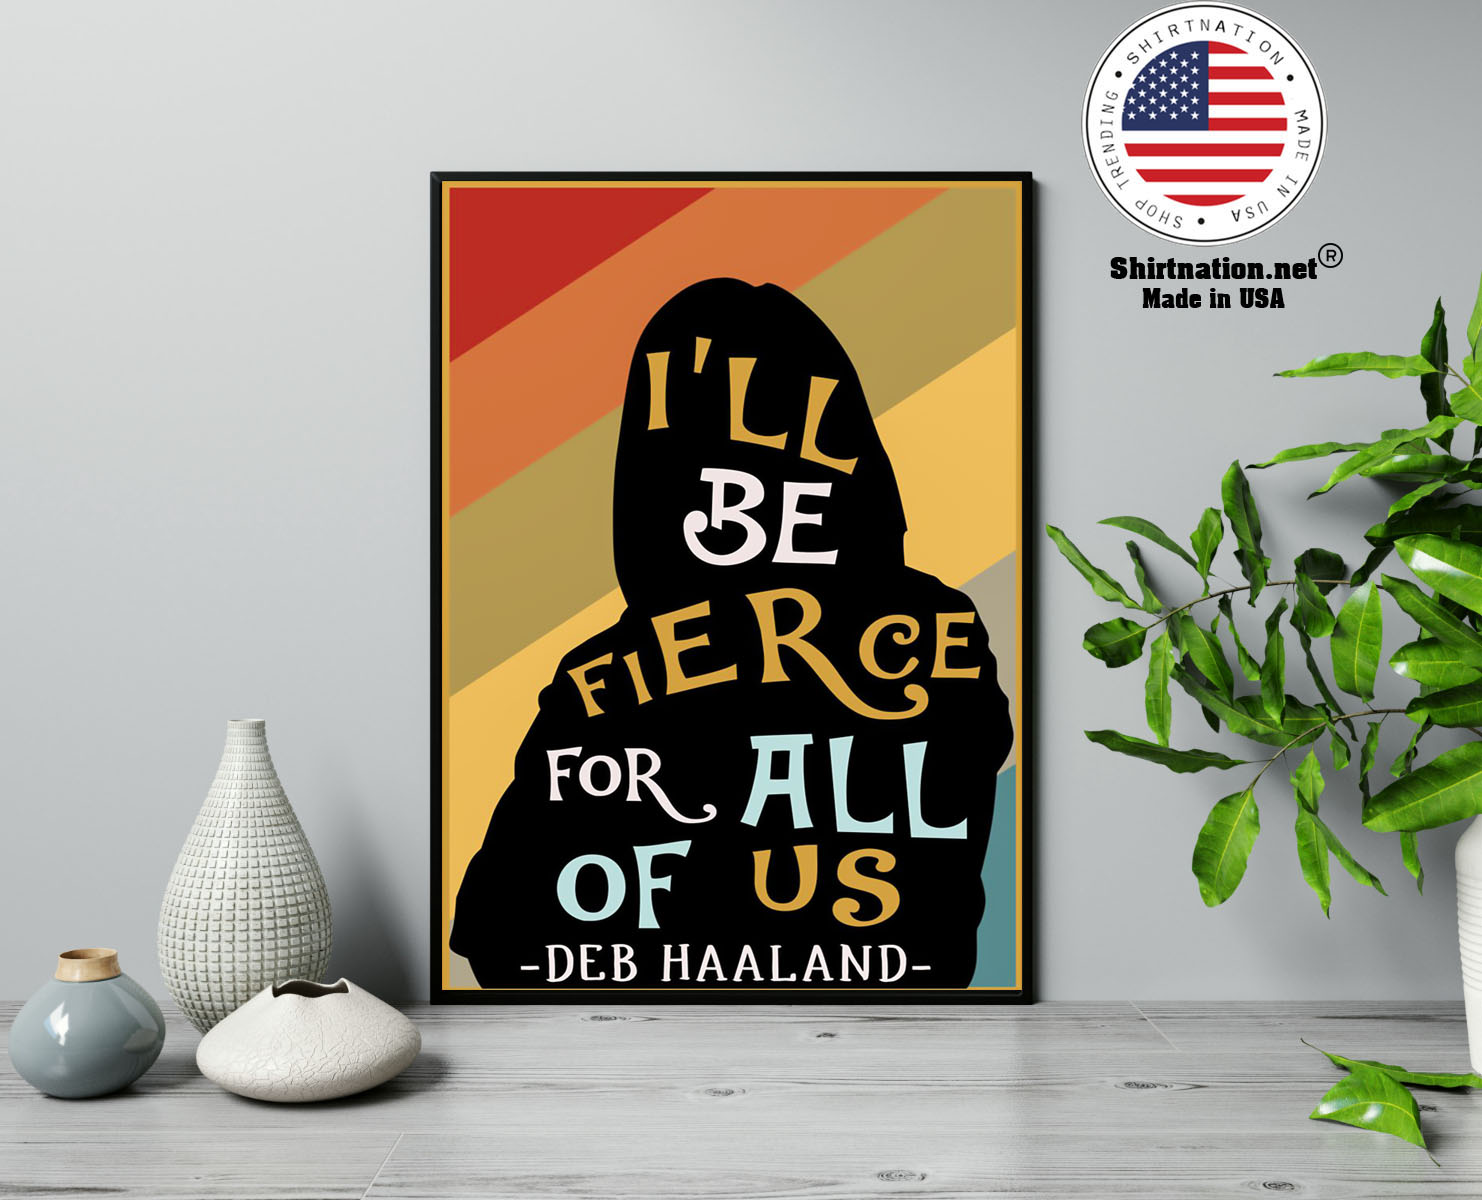 Ill be fierce for all of us deb haaland poster 13